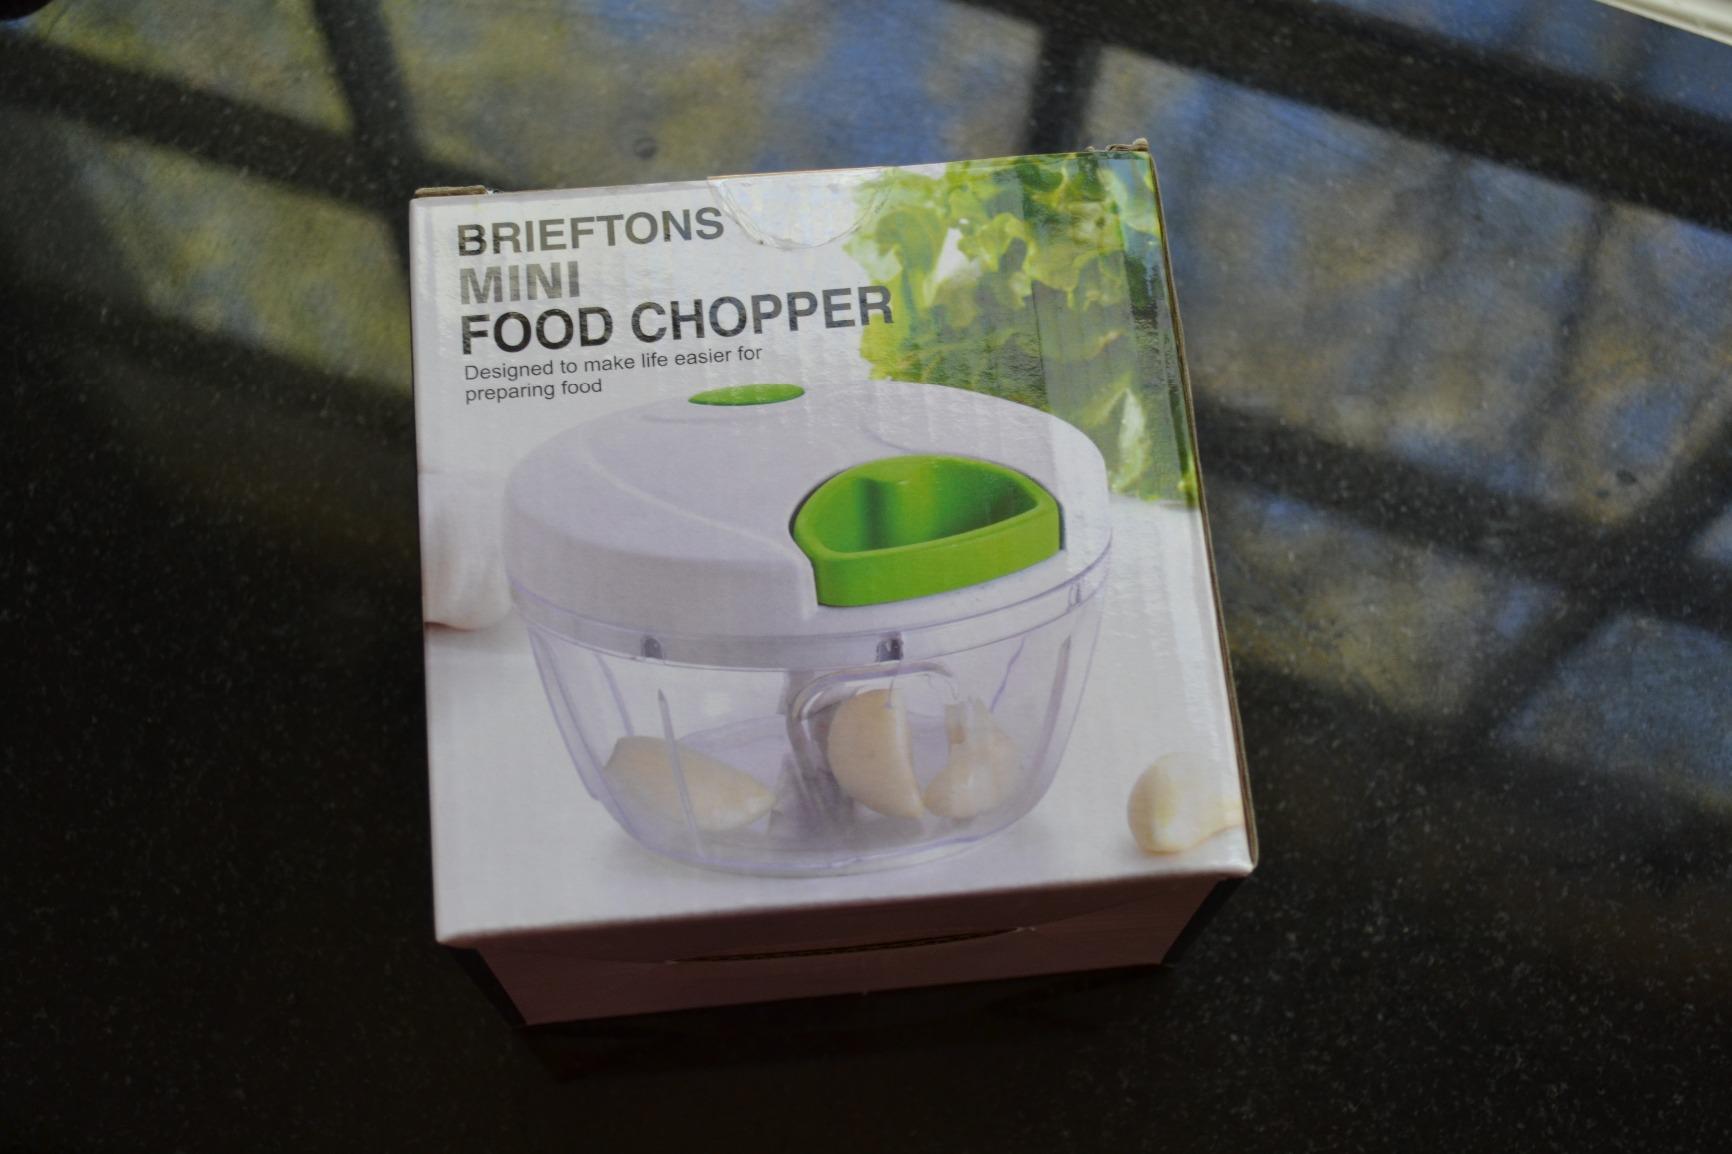 Brieftons “QuickPush” Food Chopper — Tools and Toys